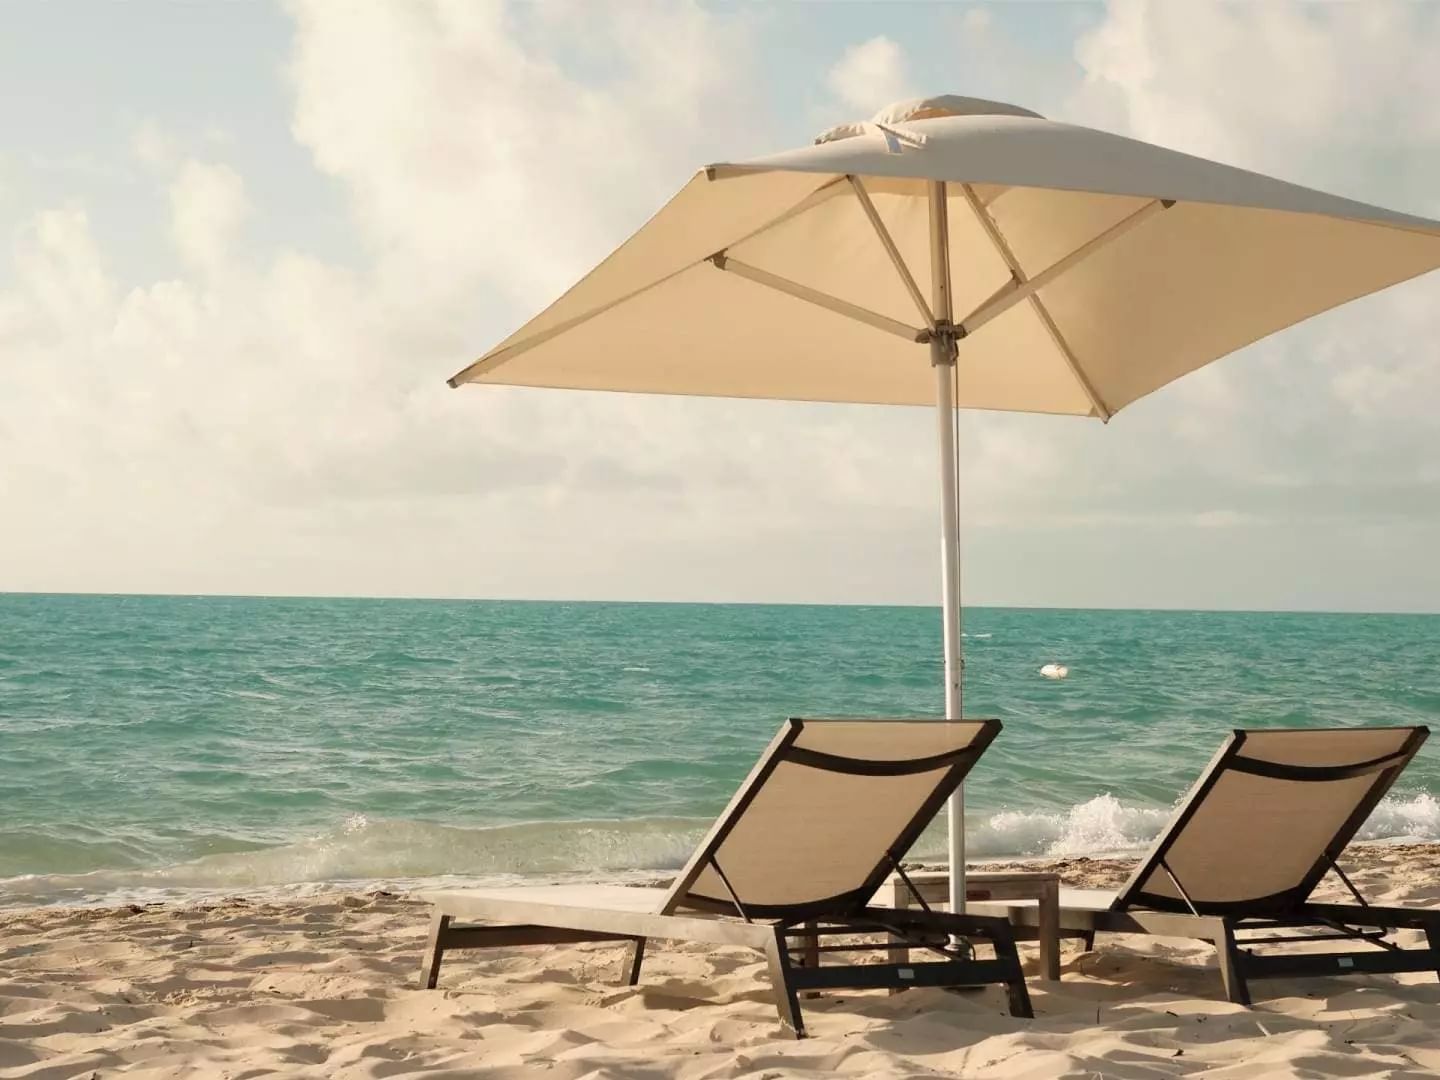 Lounge chairs & an umbrella by the beach, H2O Life Style Resort